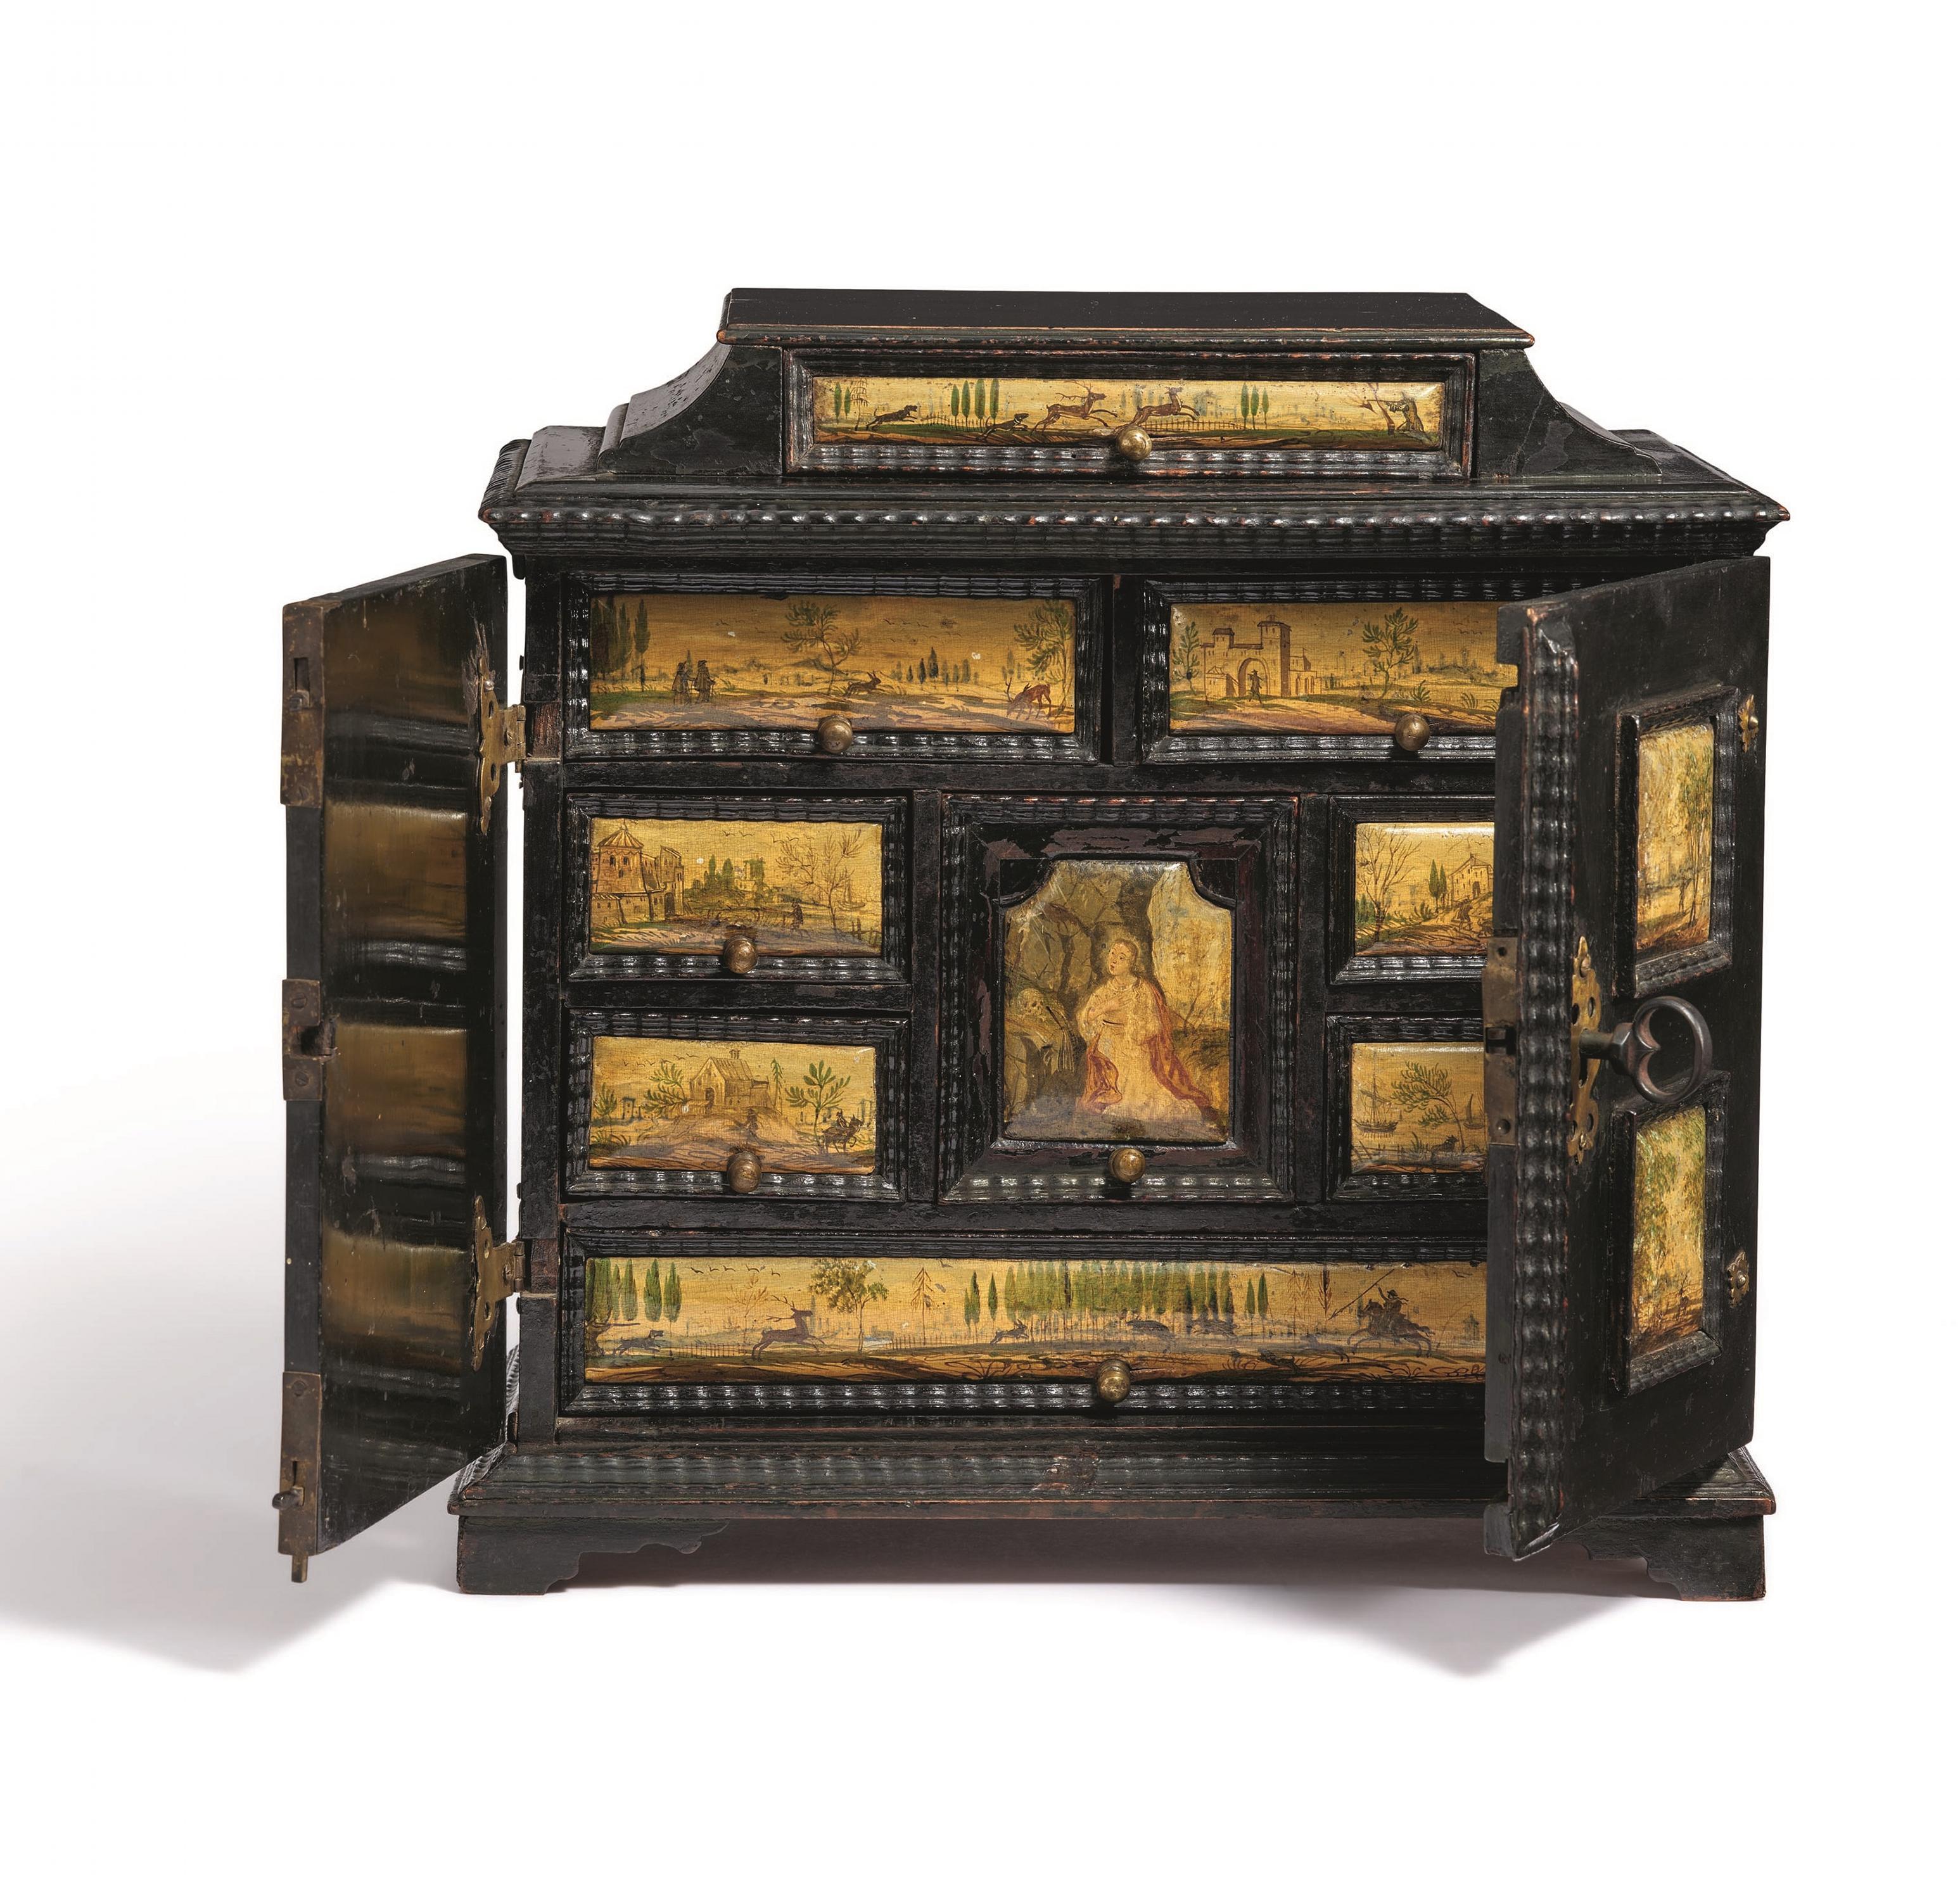 SOFTWOOD CABINET ON STAND WITH LANDSCAPES AND HUNTING SCENES